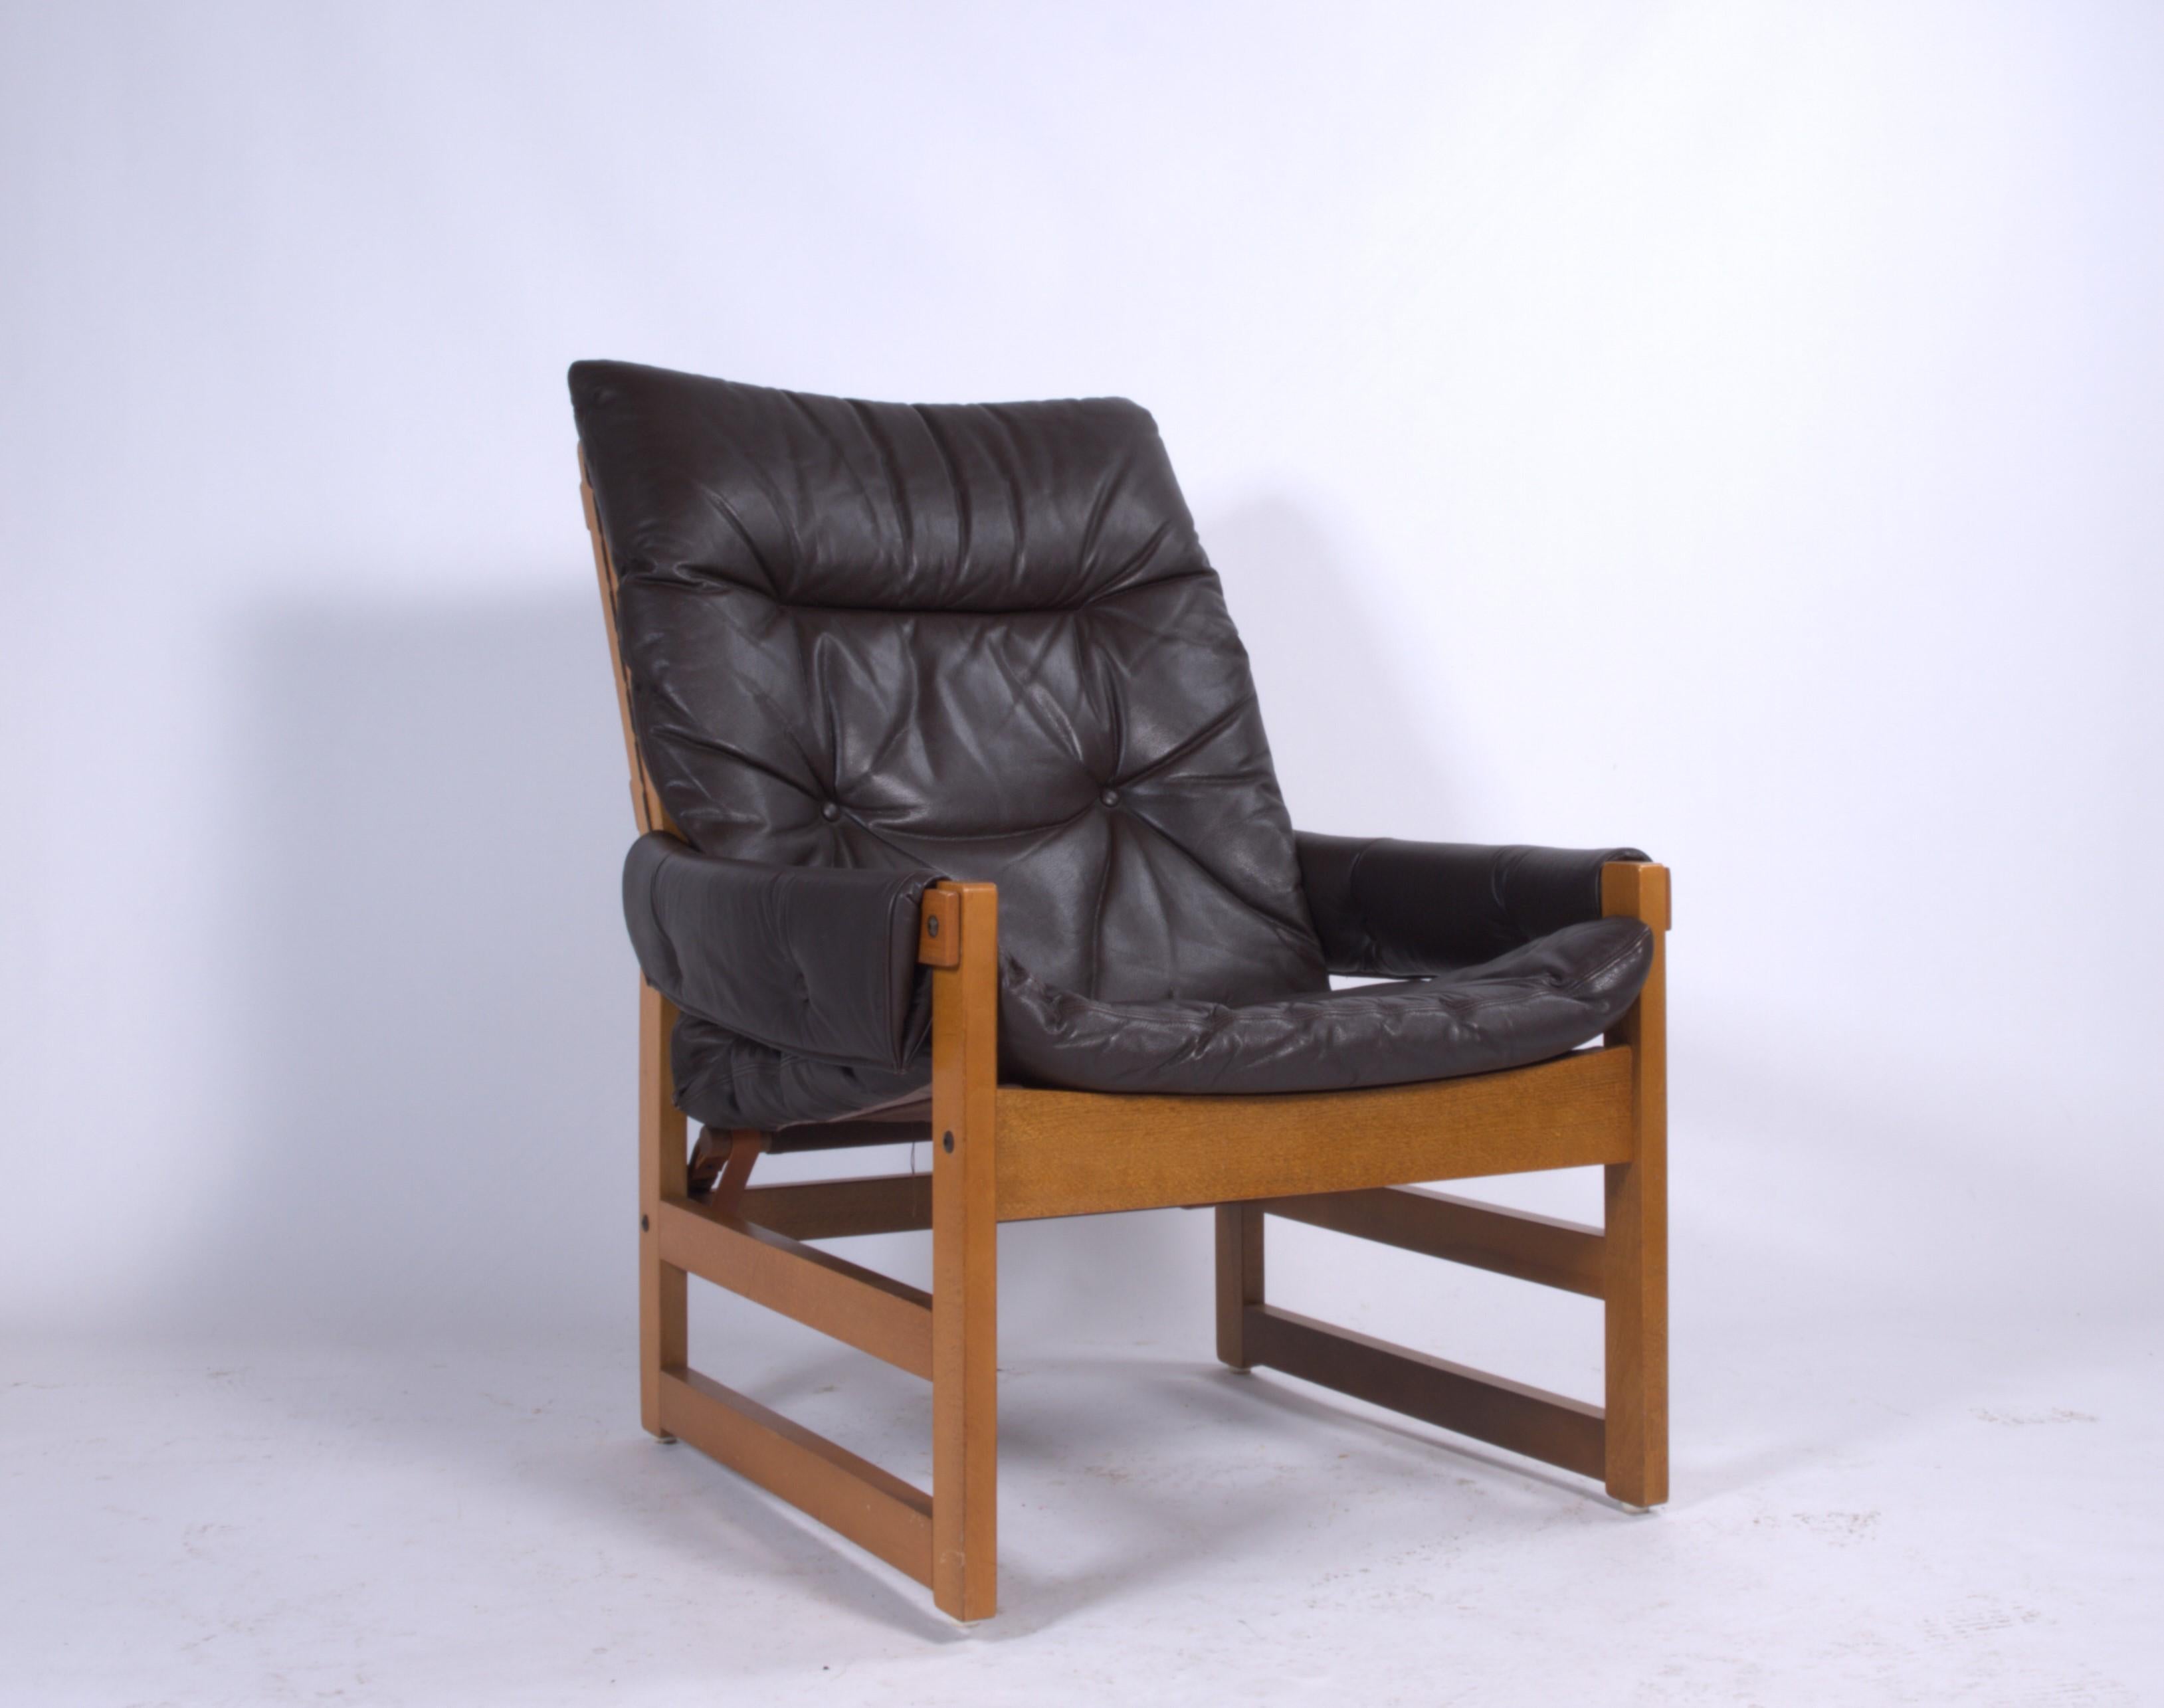 This solid Scandinavian armchair with an ottoman is a vintage gem that will elevate the style of any living space. It is in great condition and has had only one owner since the 1970s, adding to its unique history and appeal.

Designed by the